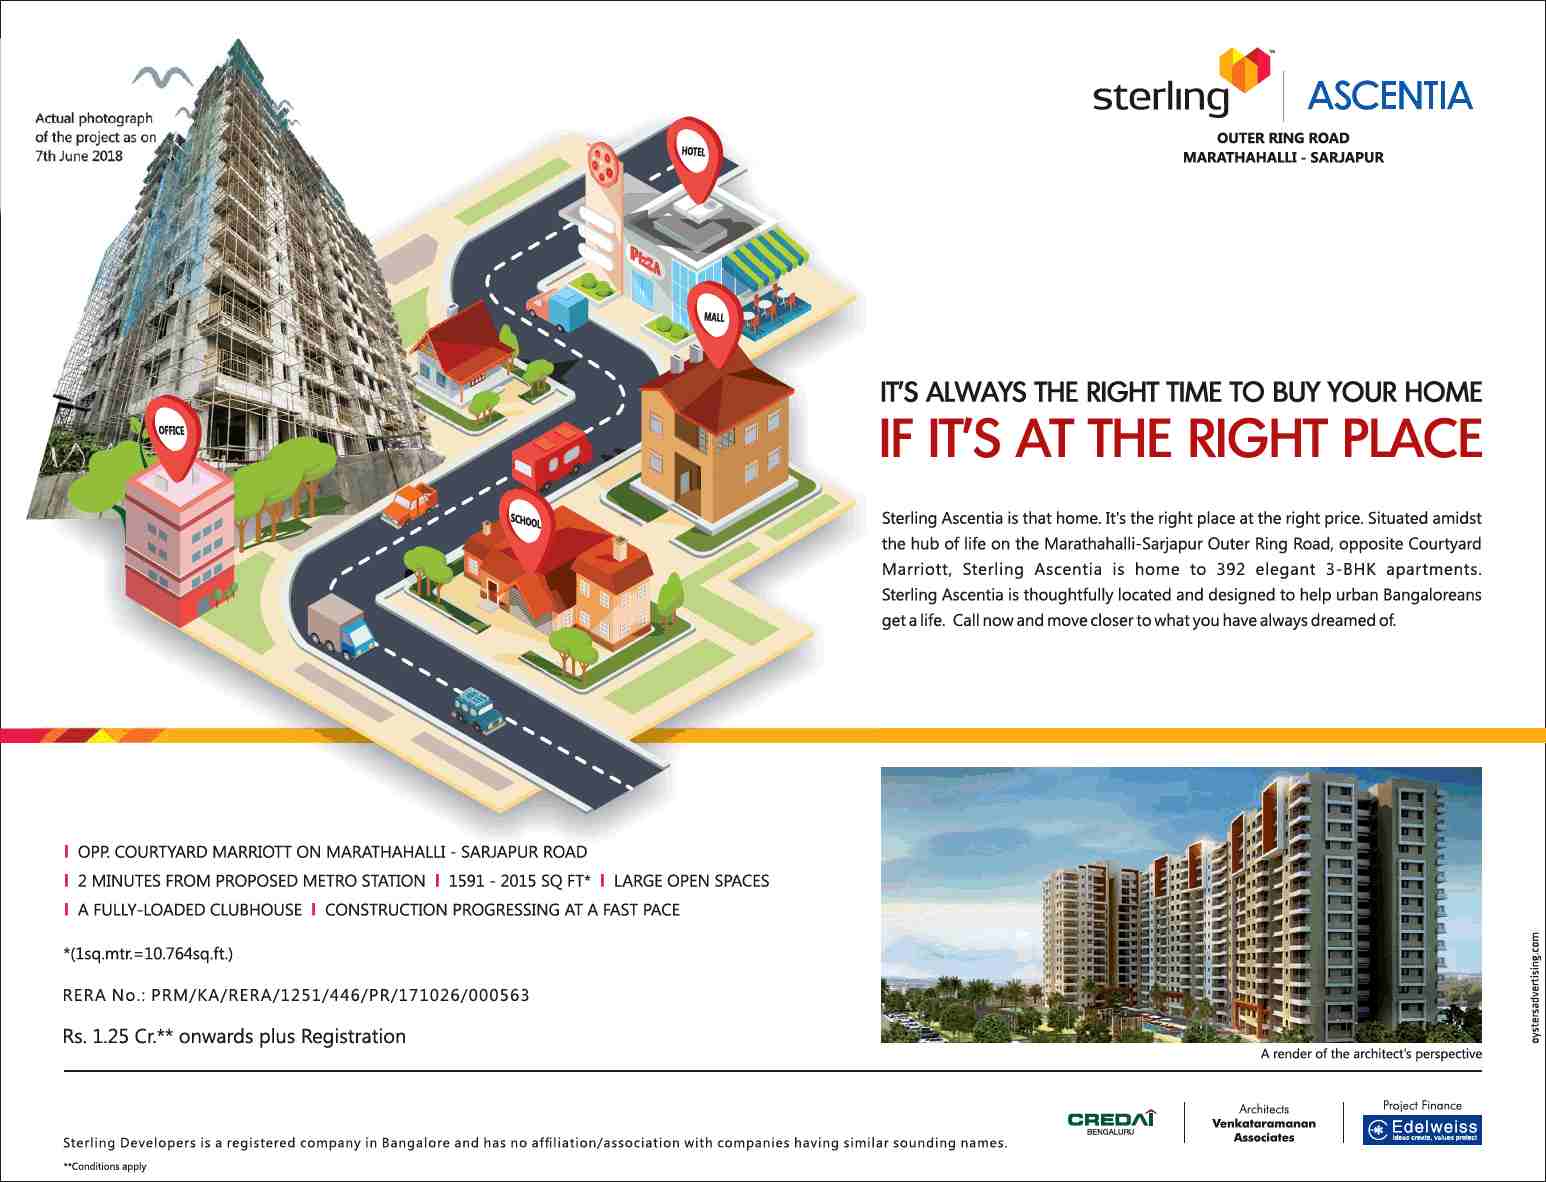 Book elegant homes starting at Rs. 1.25 cr. at Sterling Ascentia in Bangalore